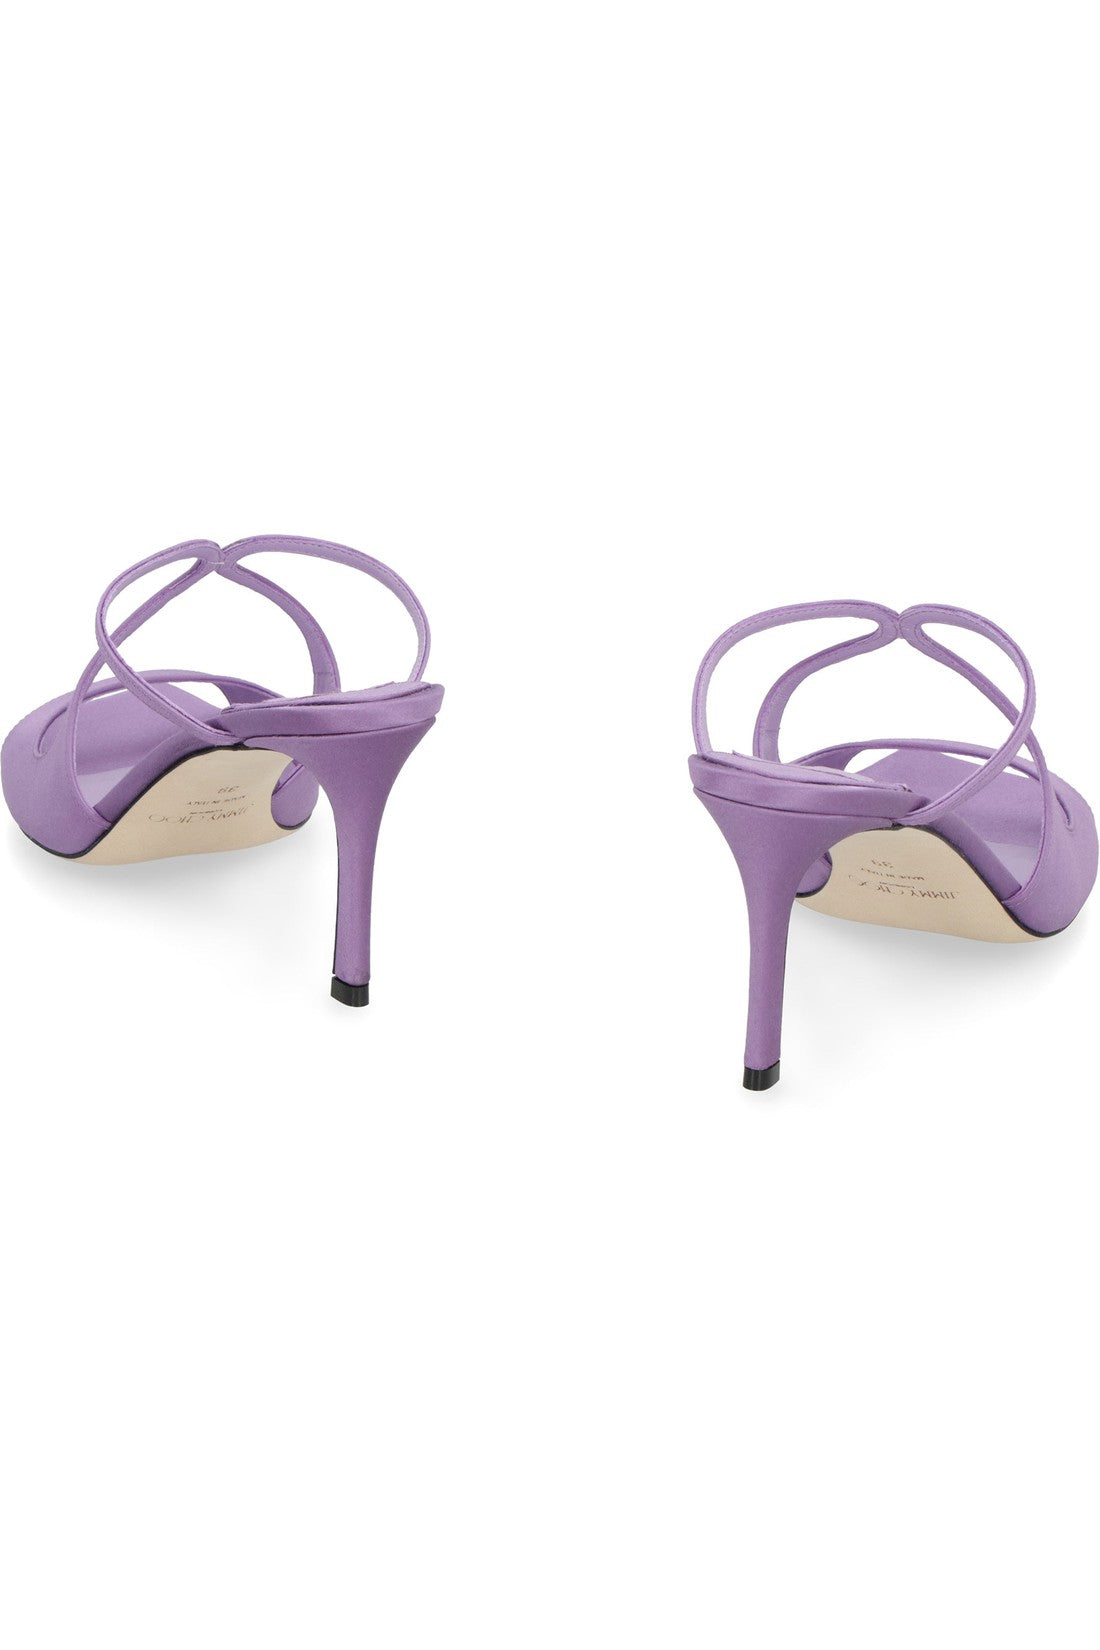 Jimmy Choo-OUTLET-SALE-Anise satin mules-ARCHIVIST